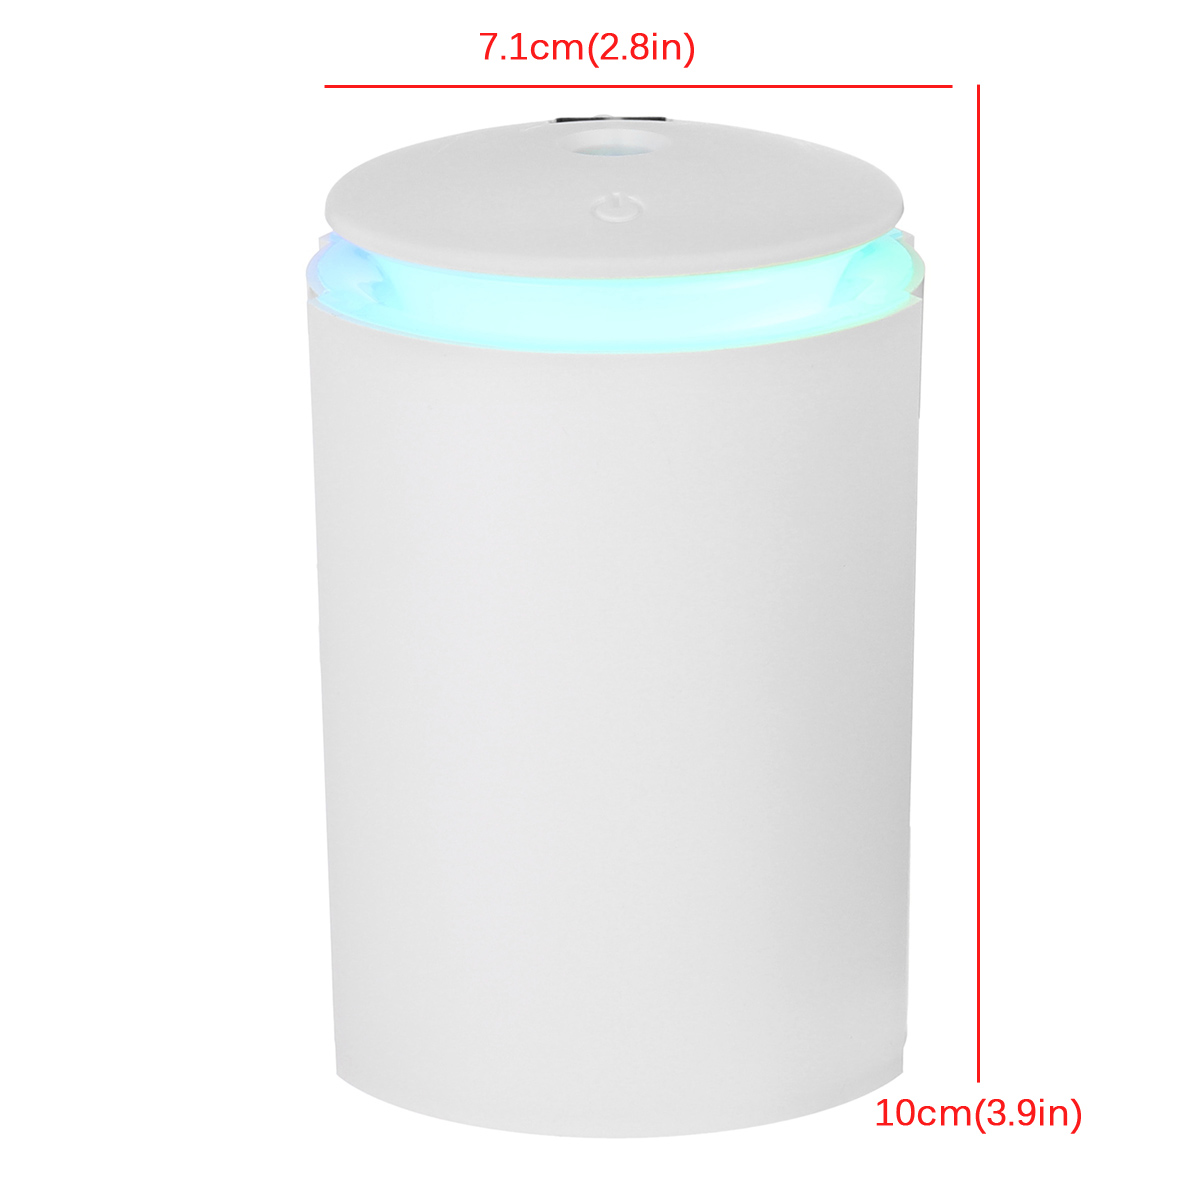 260ml-Air-Purifier-Mist-Ultrasonic-Humidifiers-LED-Lights-Washable-Home-Camping-Travel-1700971-2